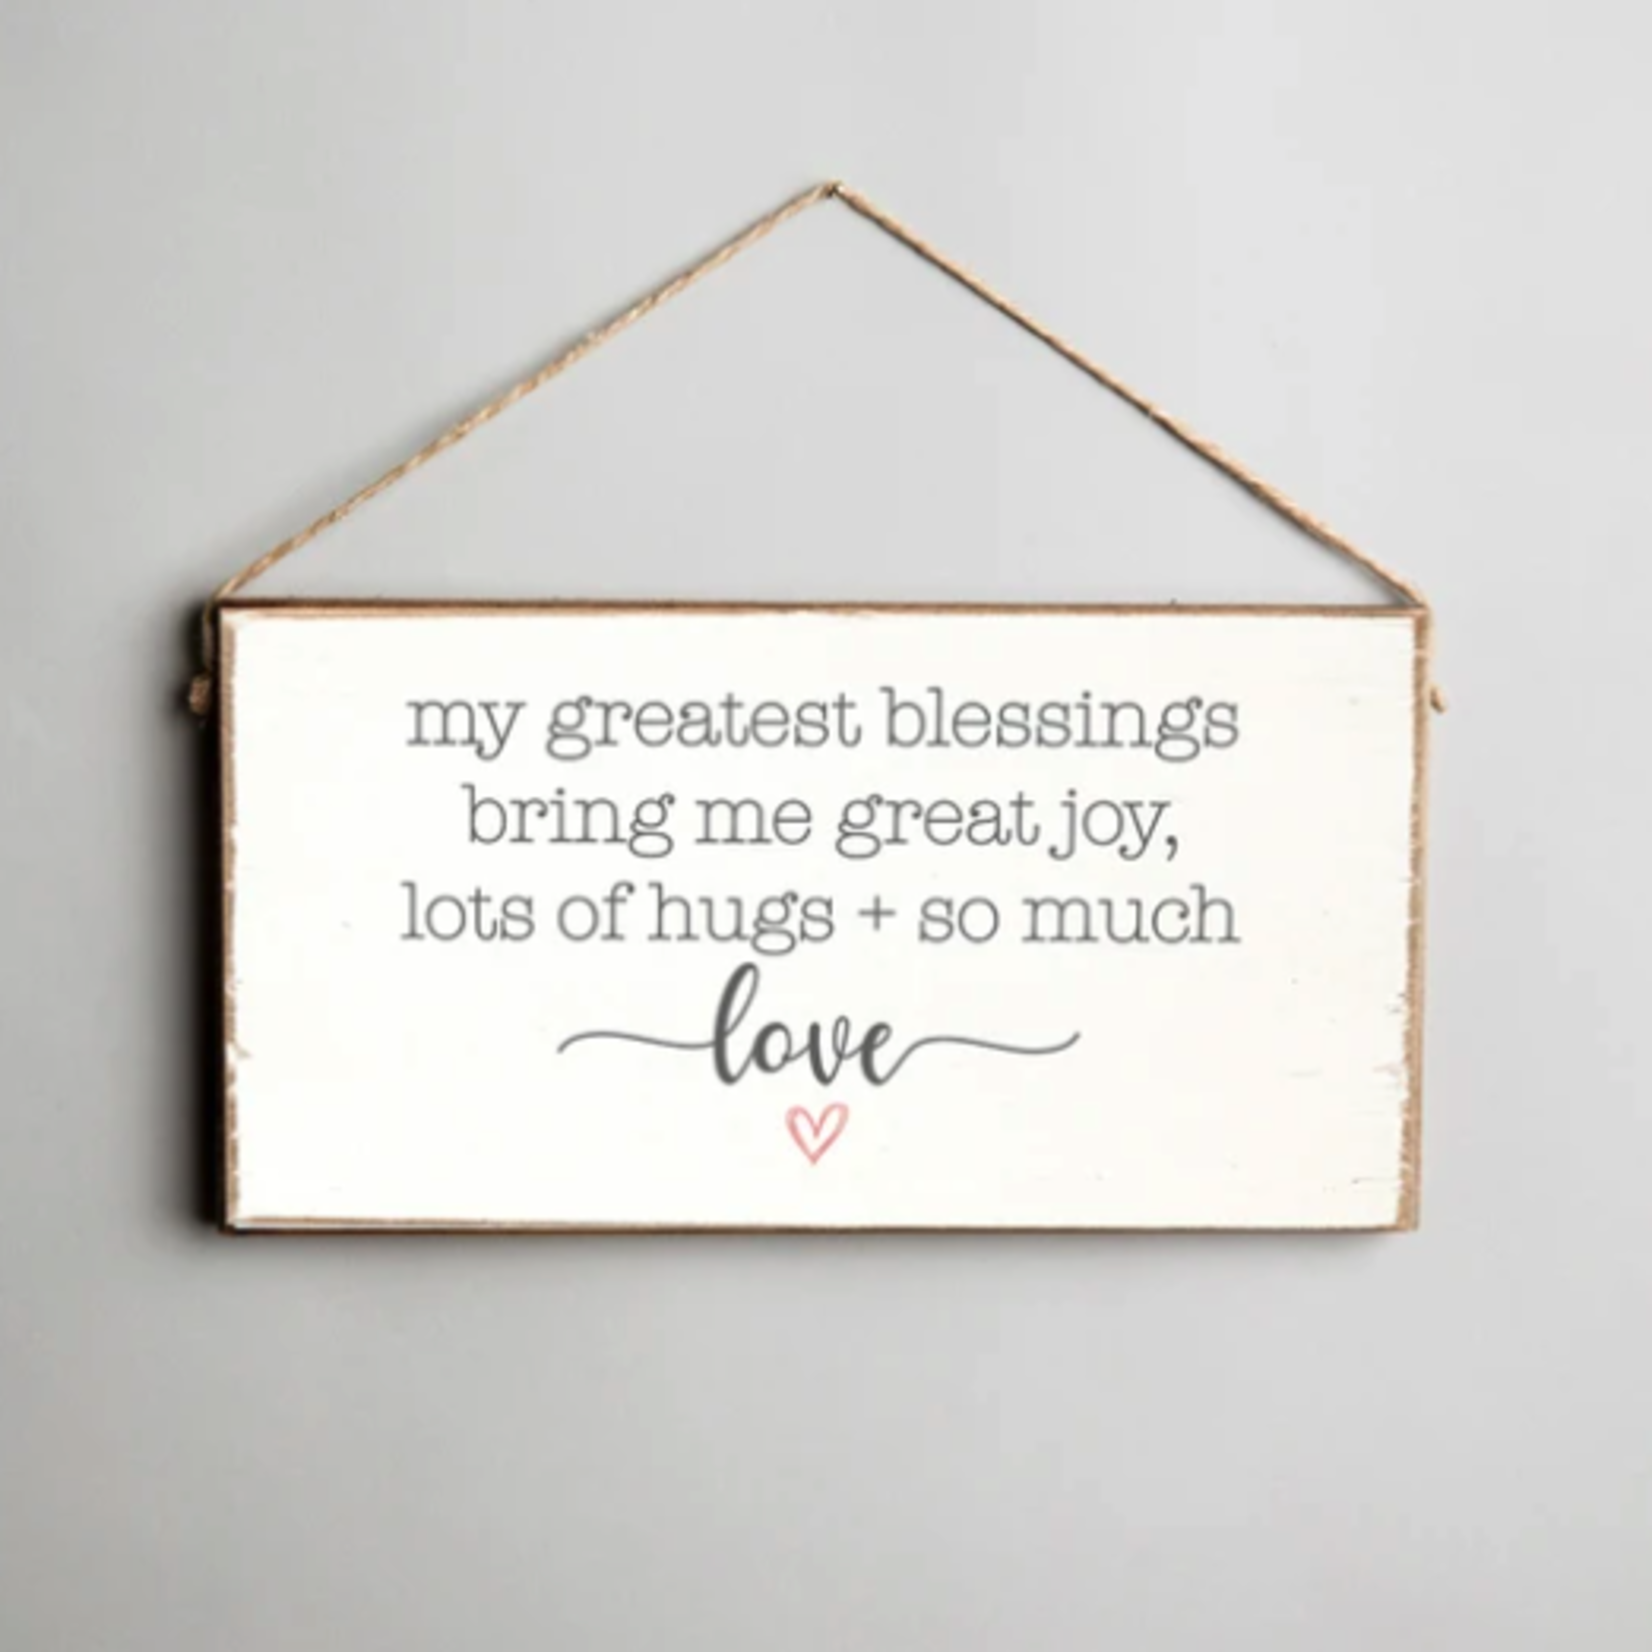 Rustic Marlin Rustic Marlin - Twine Sign - My Greatest Blessings Bring Me